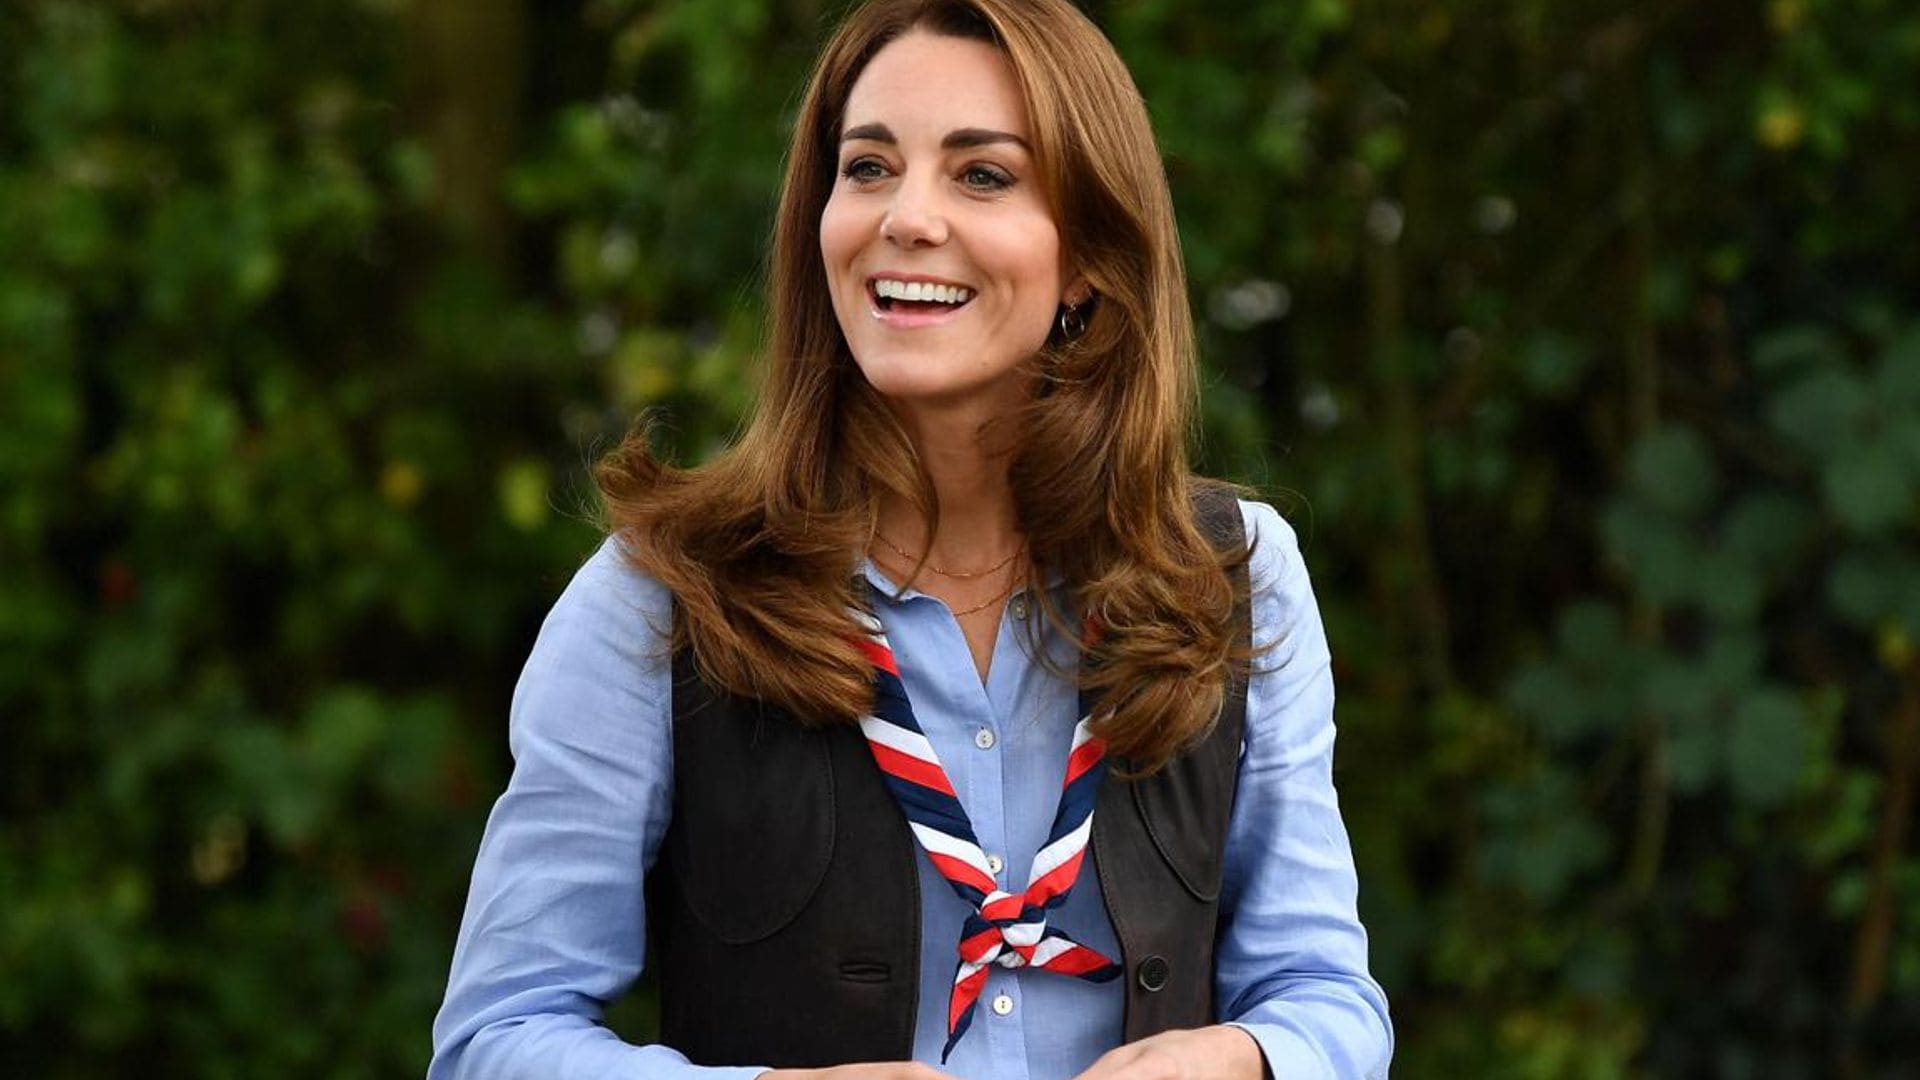 Kate Middleton makes history as the first woman to hold this role